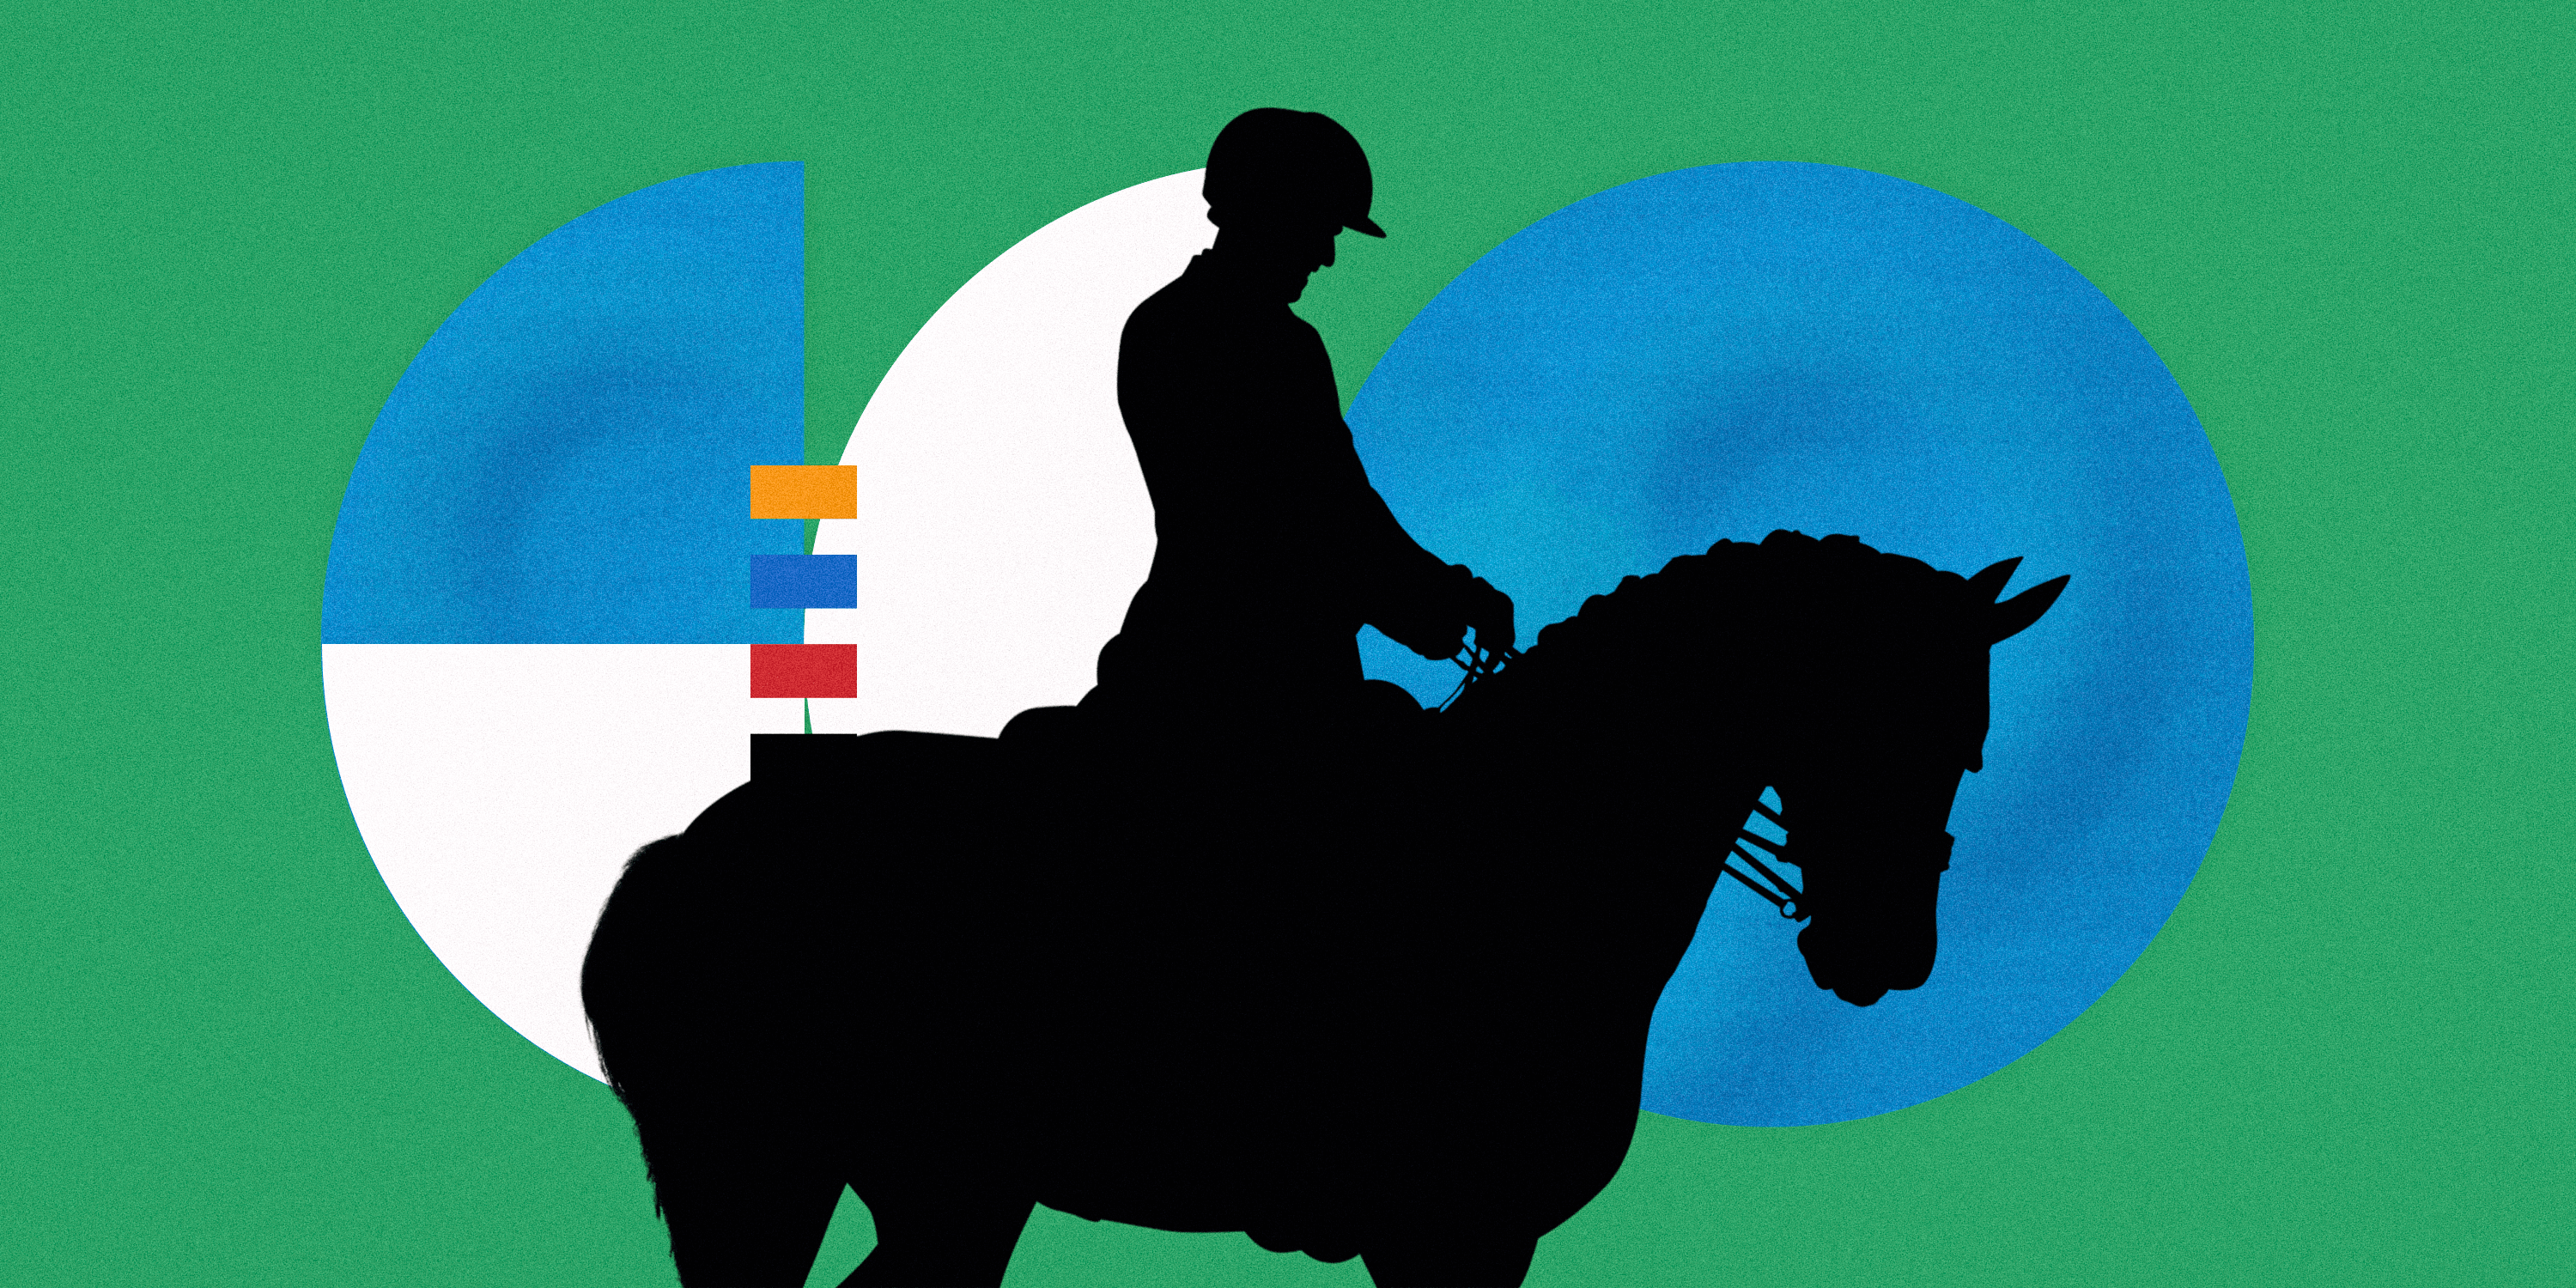 The Dujardin scandal has rocked equestrian sport. Does it have a future at the Olympics?